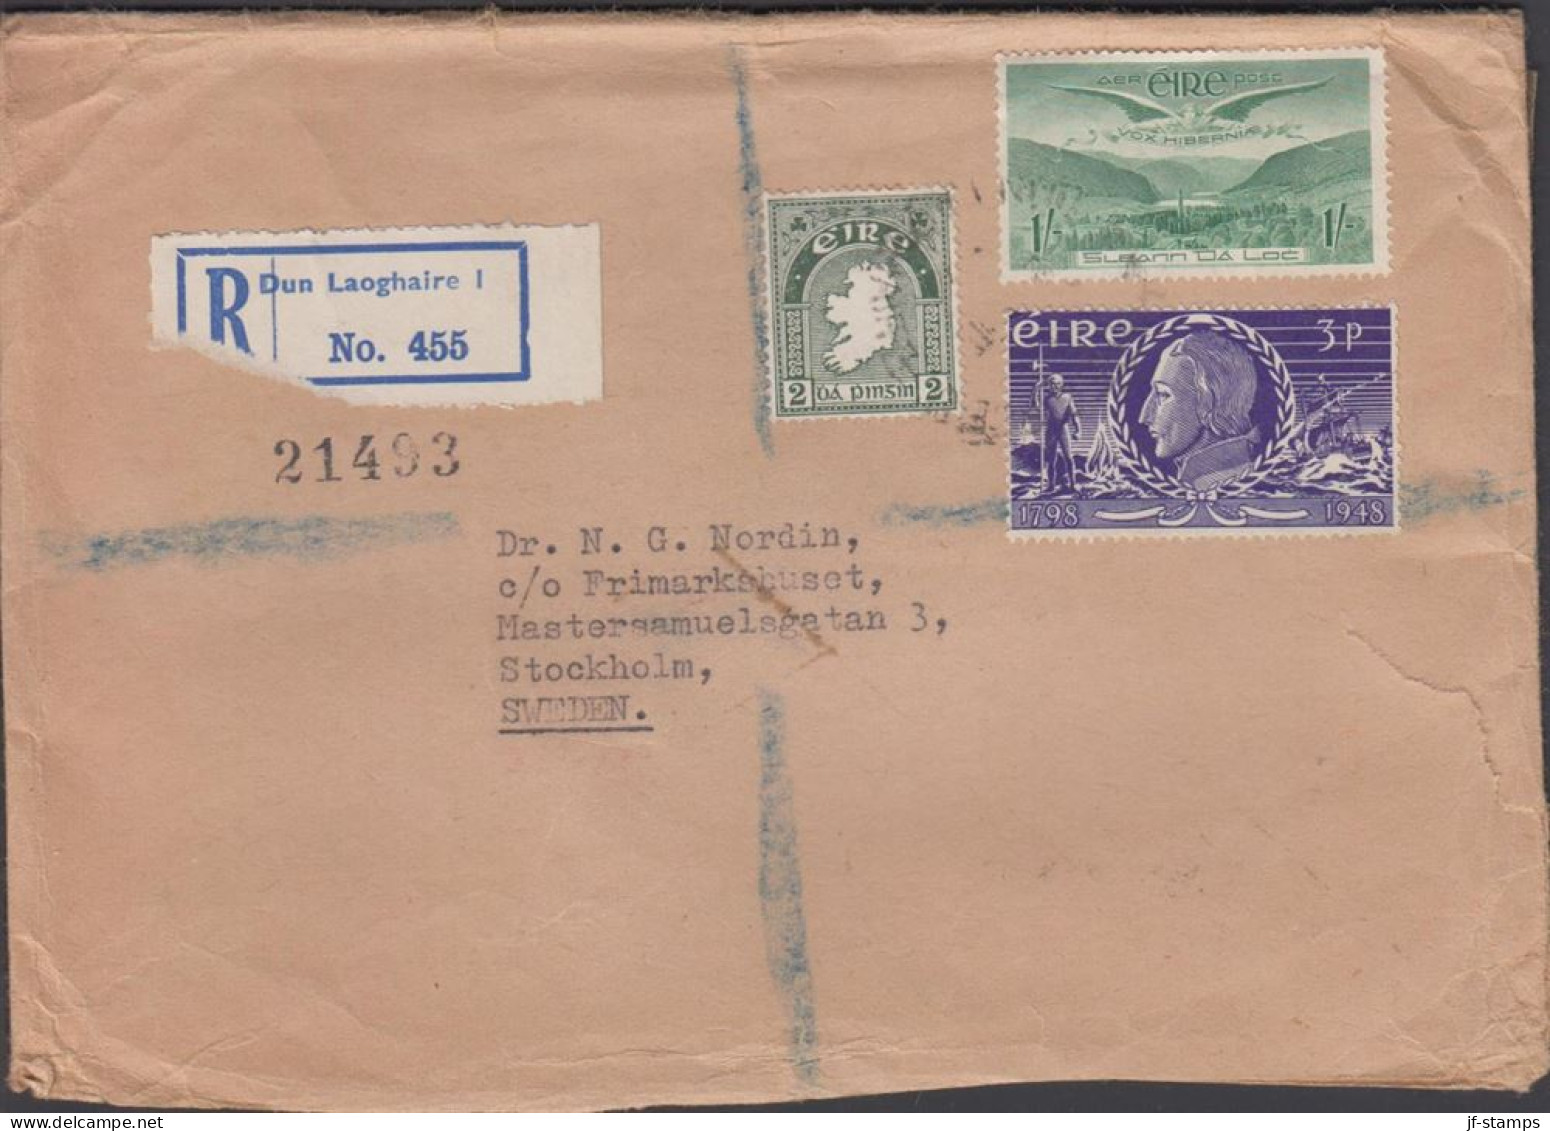 1949. EIRE. 1 Sh AIR MAIL + 2 + Theobald Wolfe Tone 3 P On Registered Cover (tear) To Sweden... (Michel 101+) - JF432466 - Covers & Documents